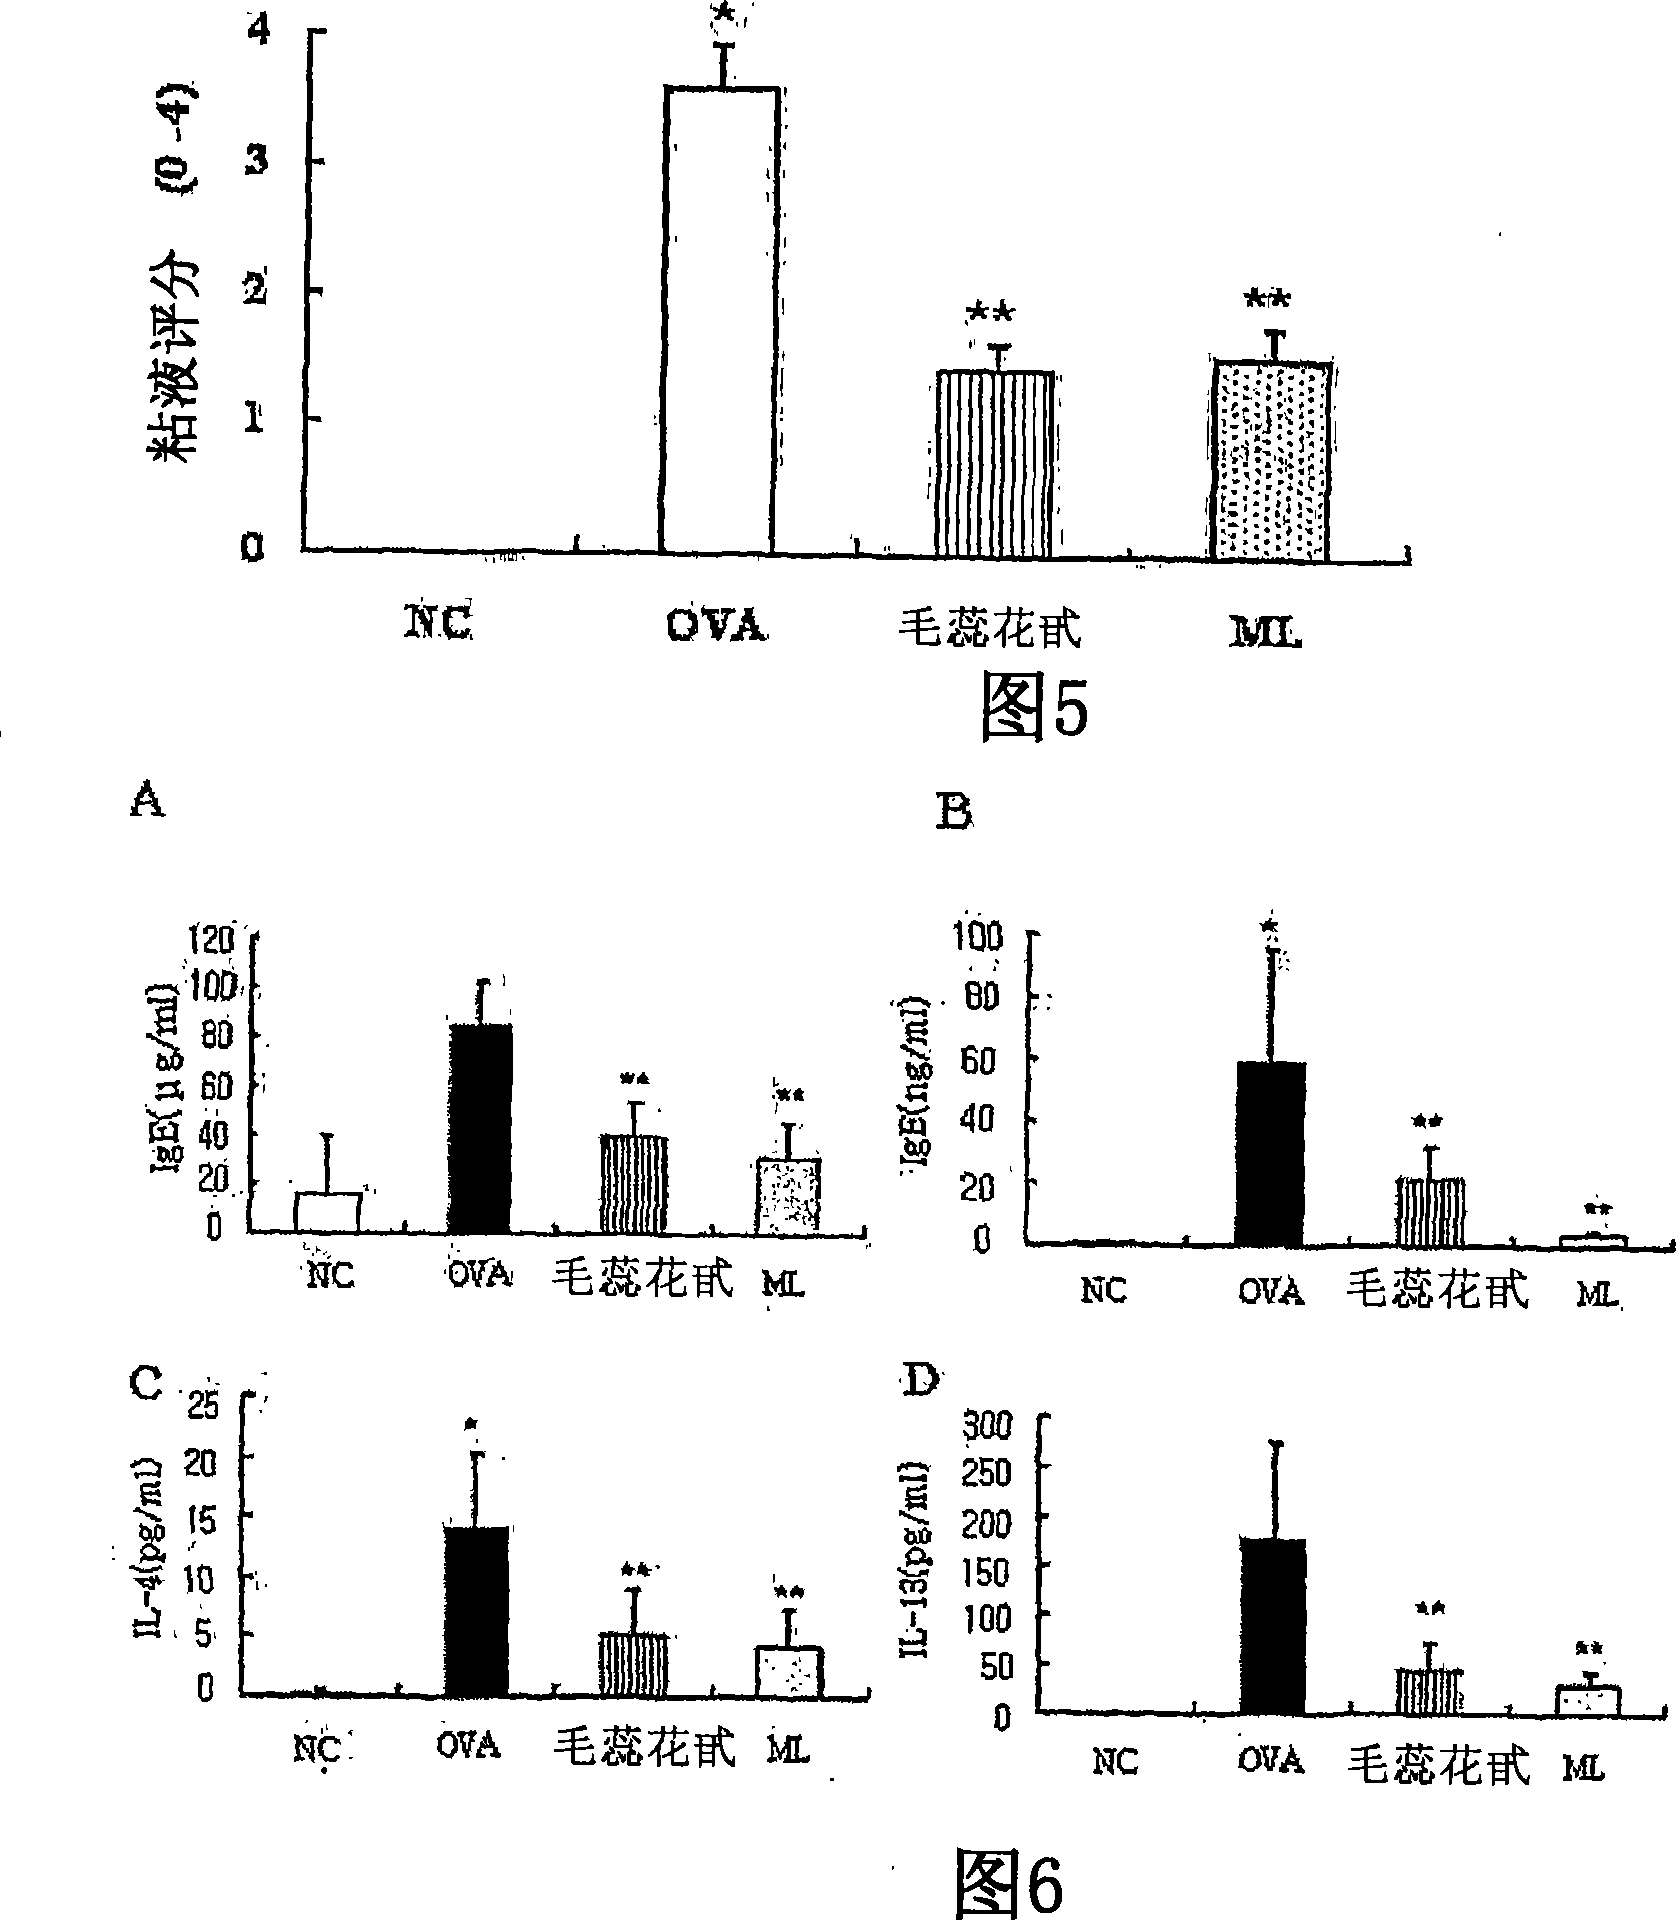 Pharmaceutical composition comprising an extract of pseudolysimachion longifolium and the catalpol derivatives isolated therefrom having antiinflammatory, antiallergic and antiasthmatic activity